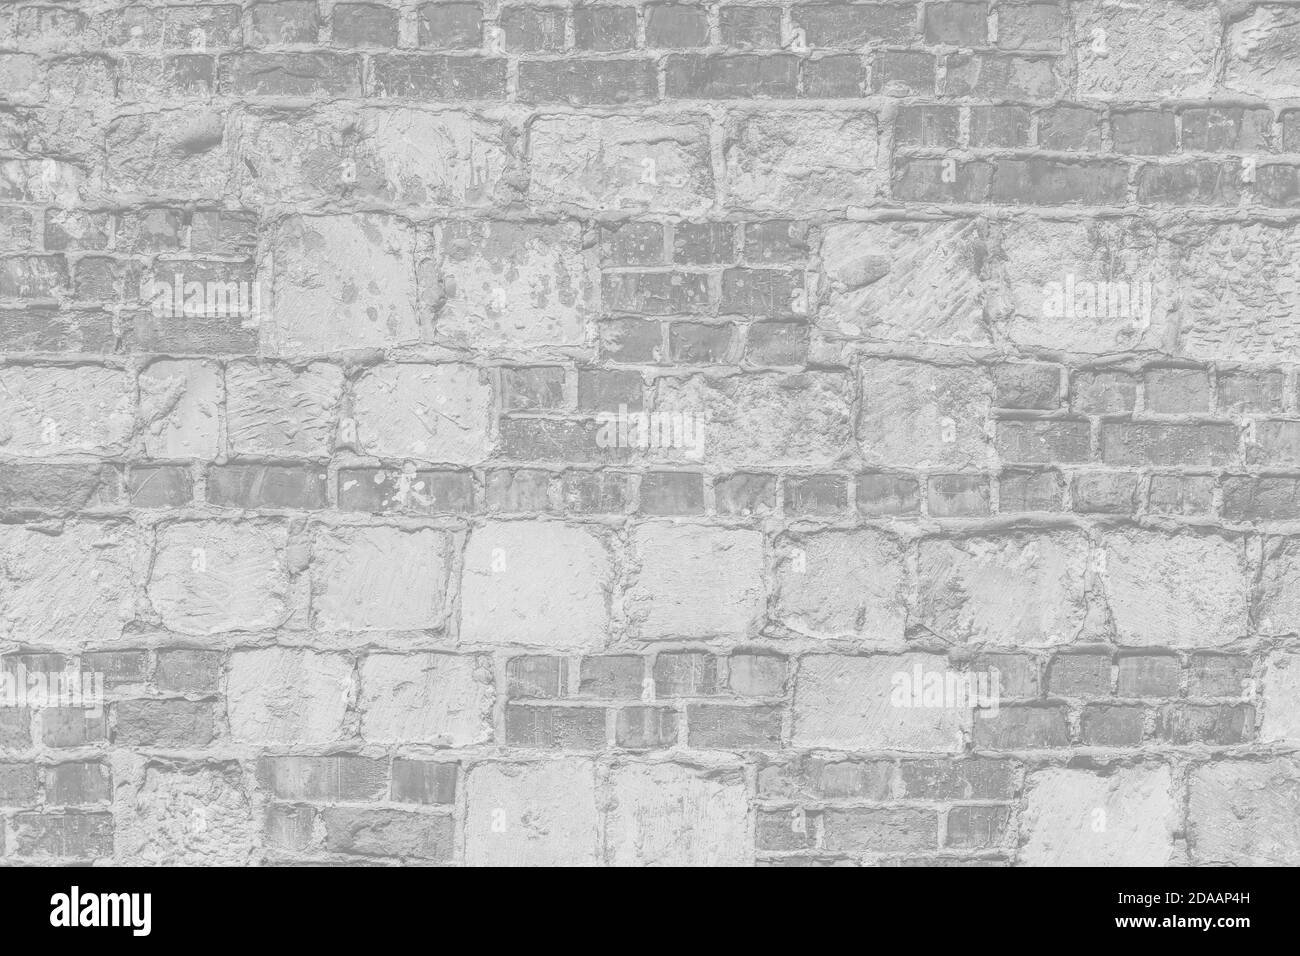 Abstract light gray background. Vintage bricklaying structure. Uneven painted plaster in whiten facade background. Stock Photo